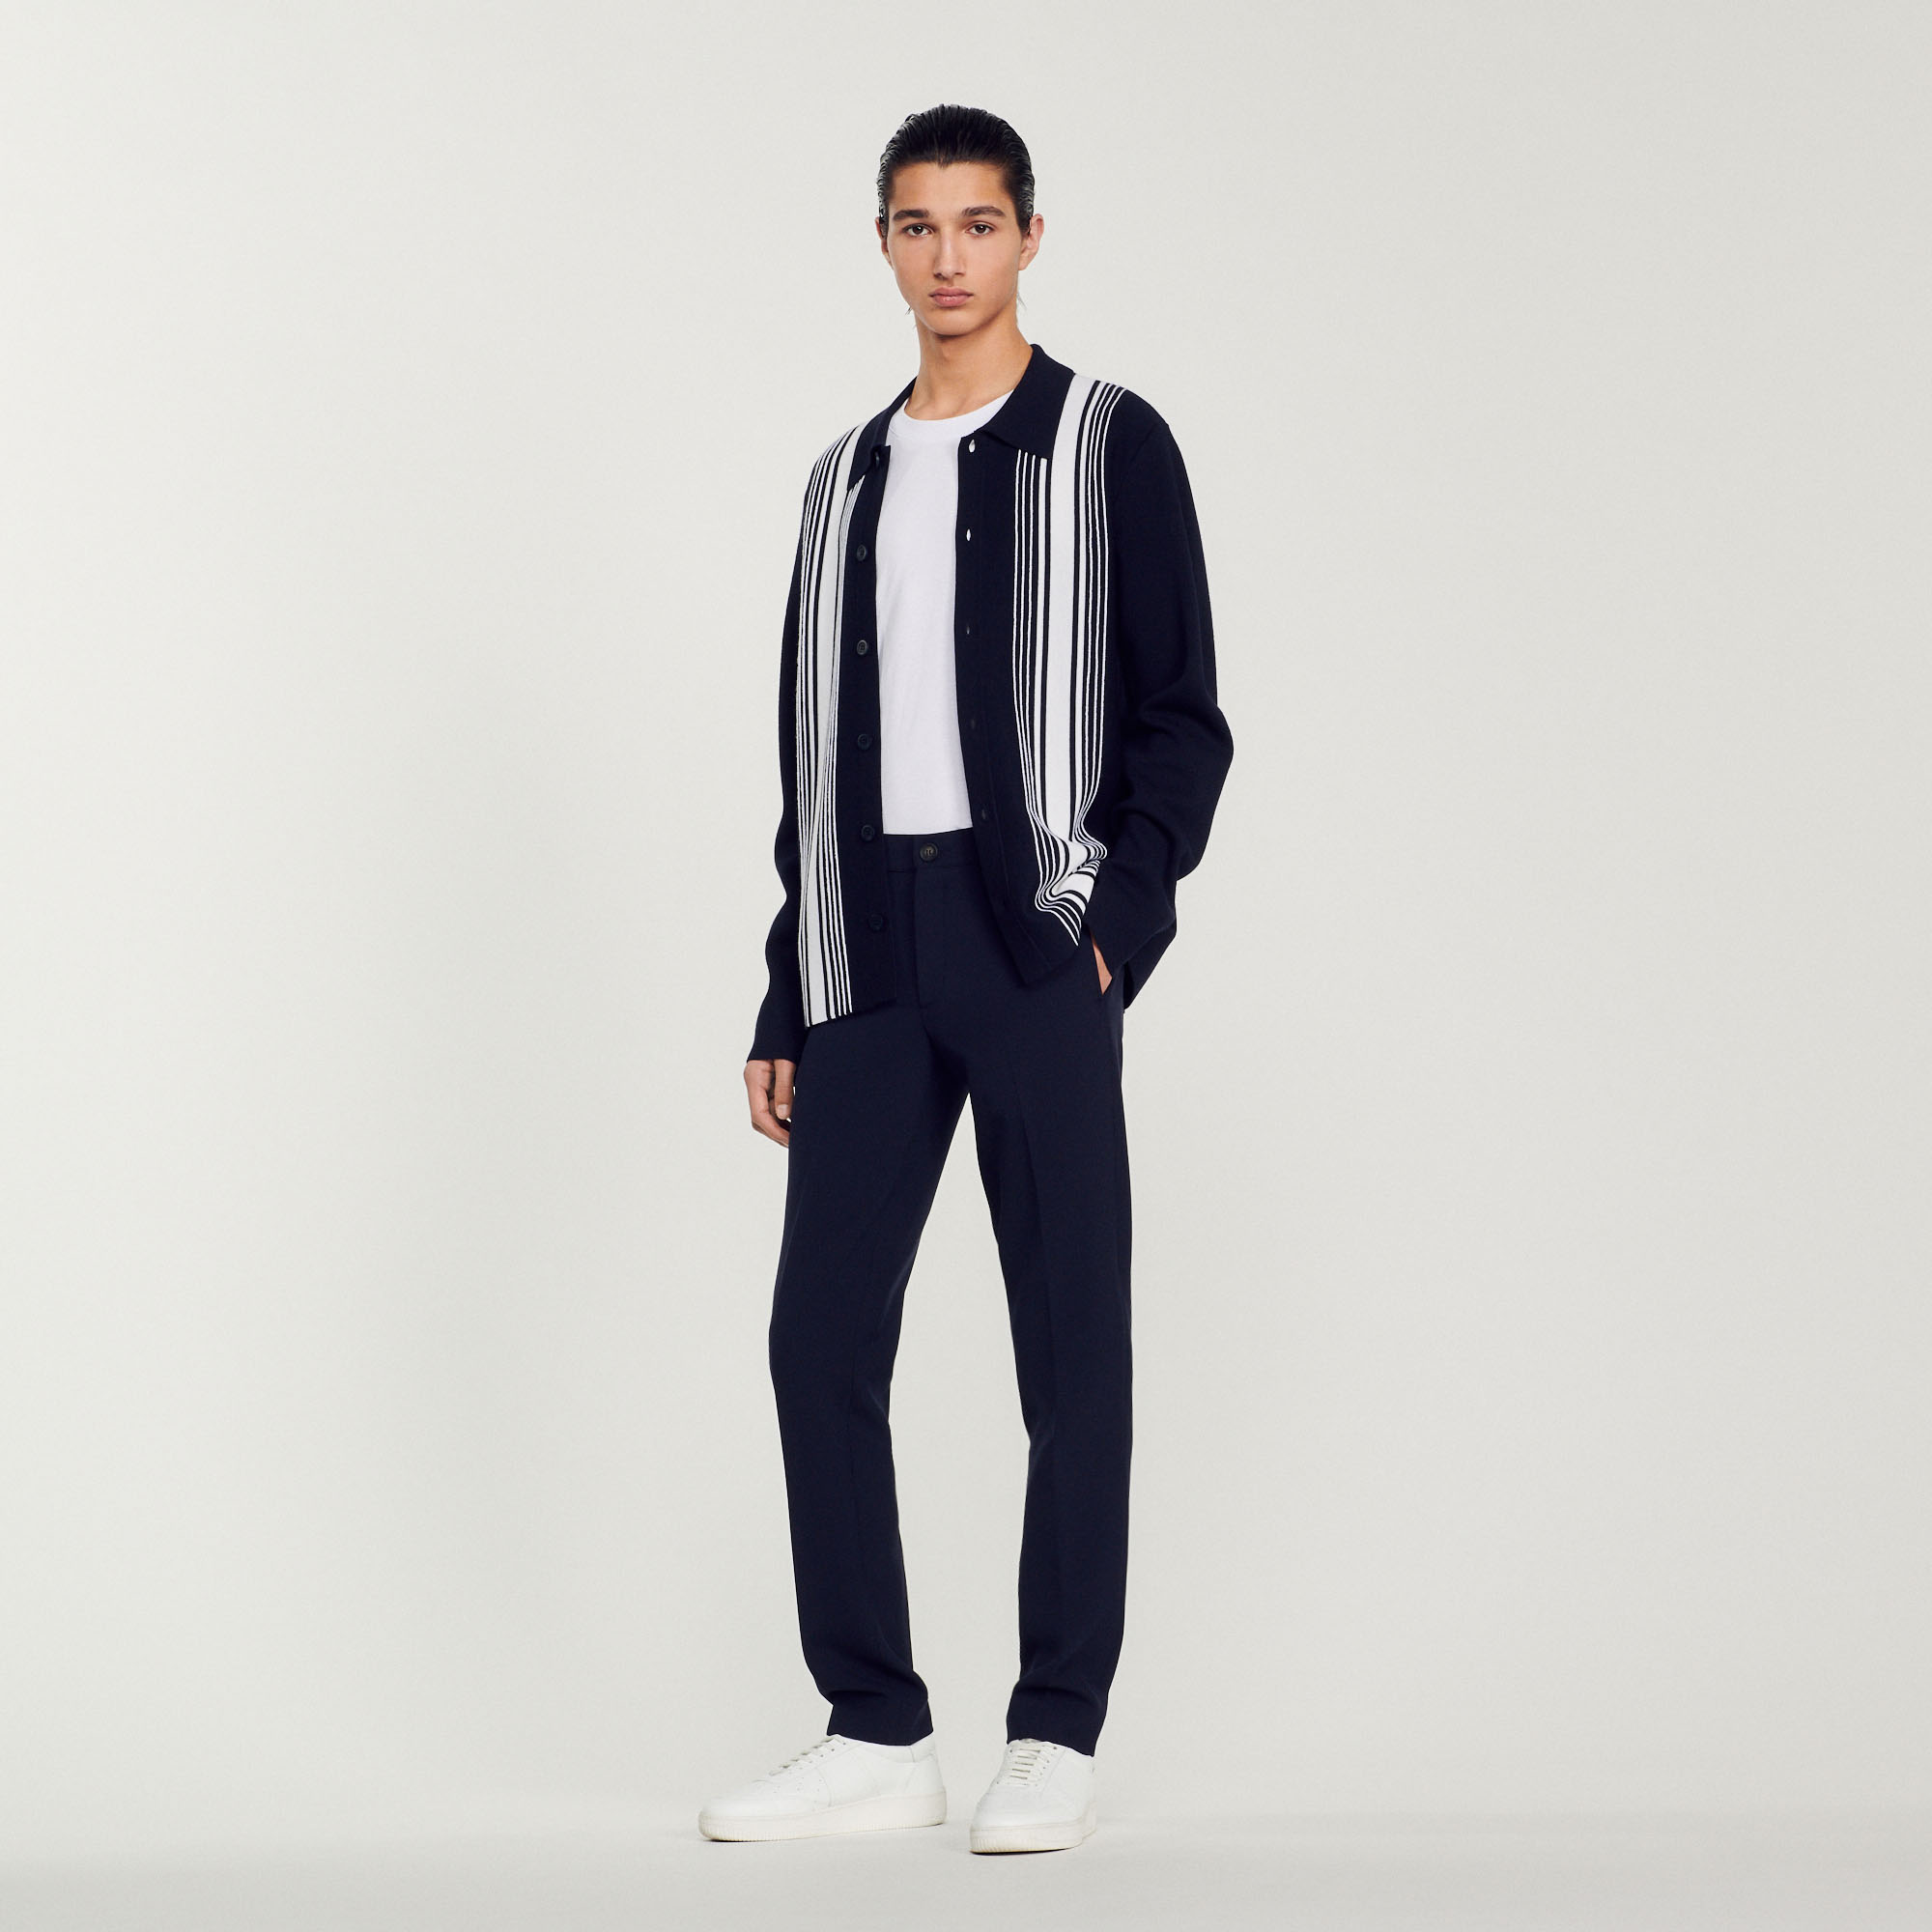 Sandro polyester Straight-leg pants in technical fabric with a semi-elasticated waist